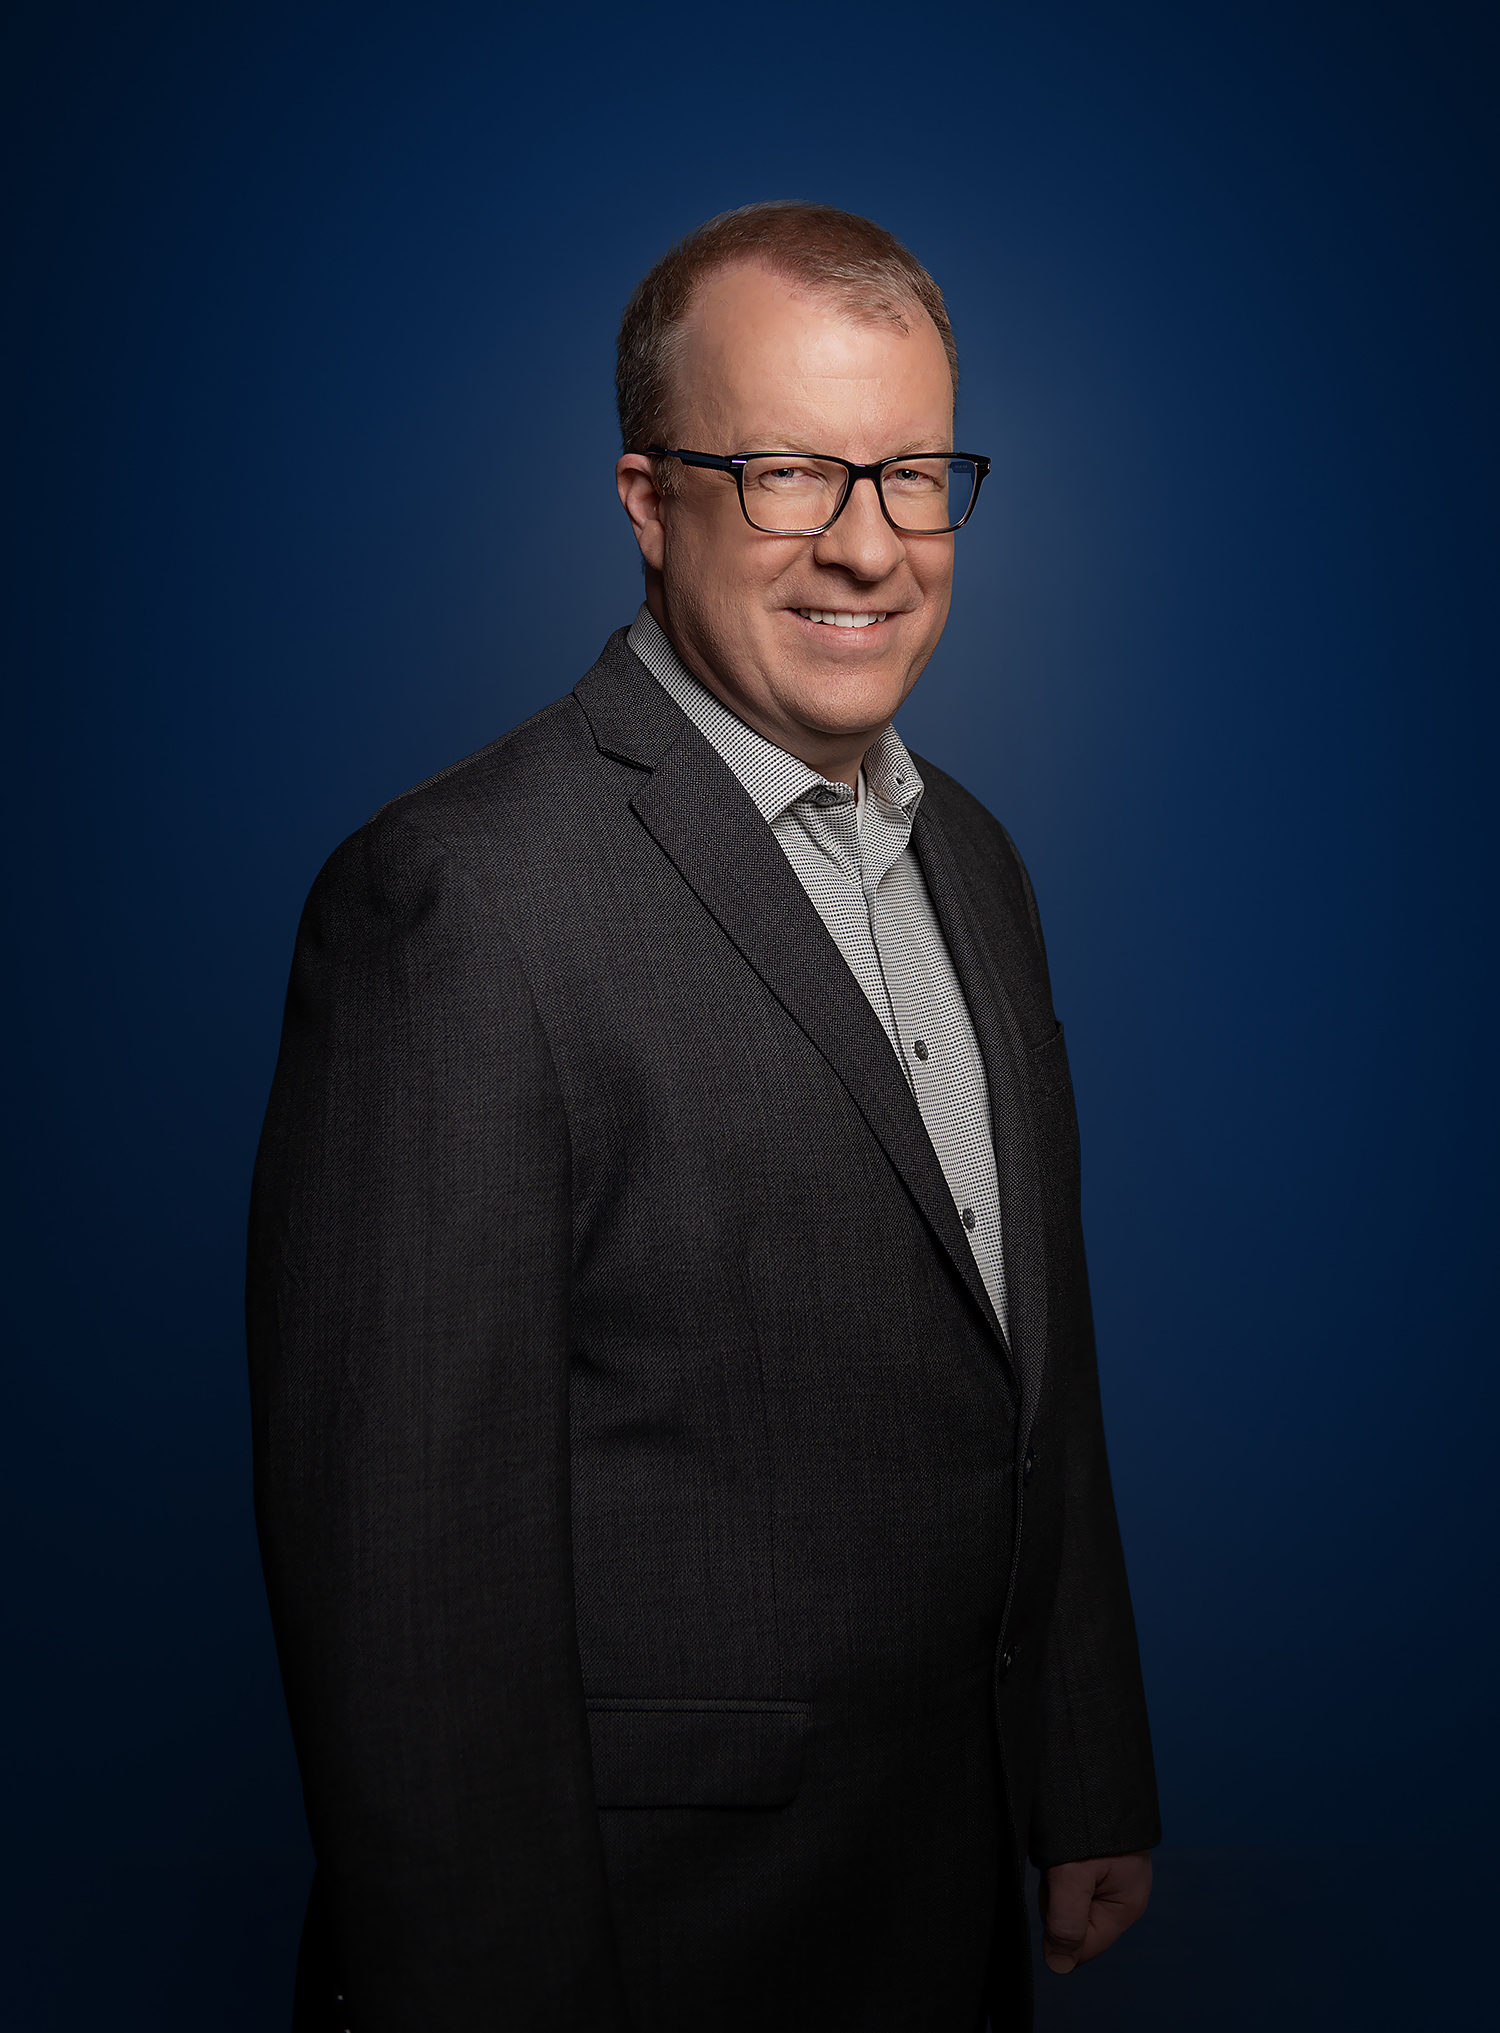 Scott Gray-Owen in a light grey shirt and charcoal blazer, smiling, against a dark blue background.